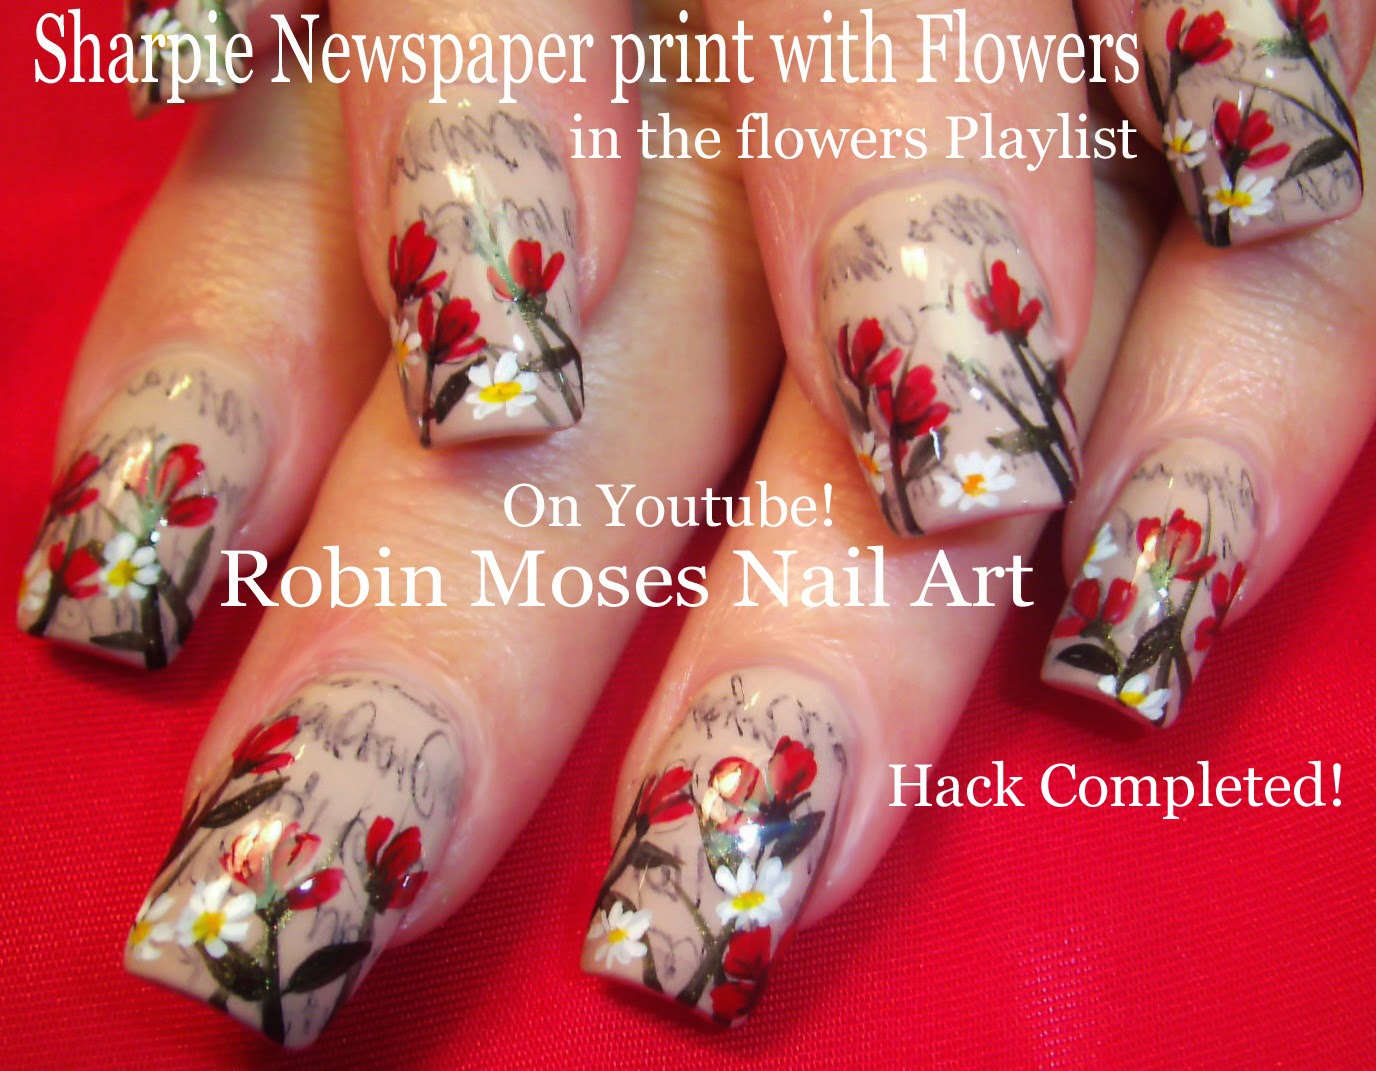 2. Quick and Easy Floral Nail Art Tutorial - wide 5